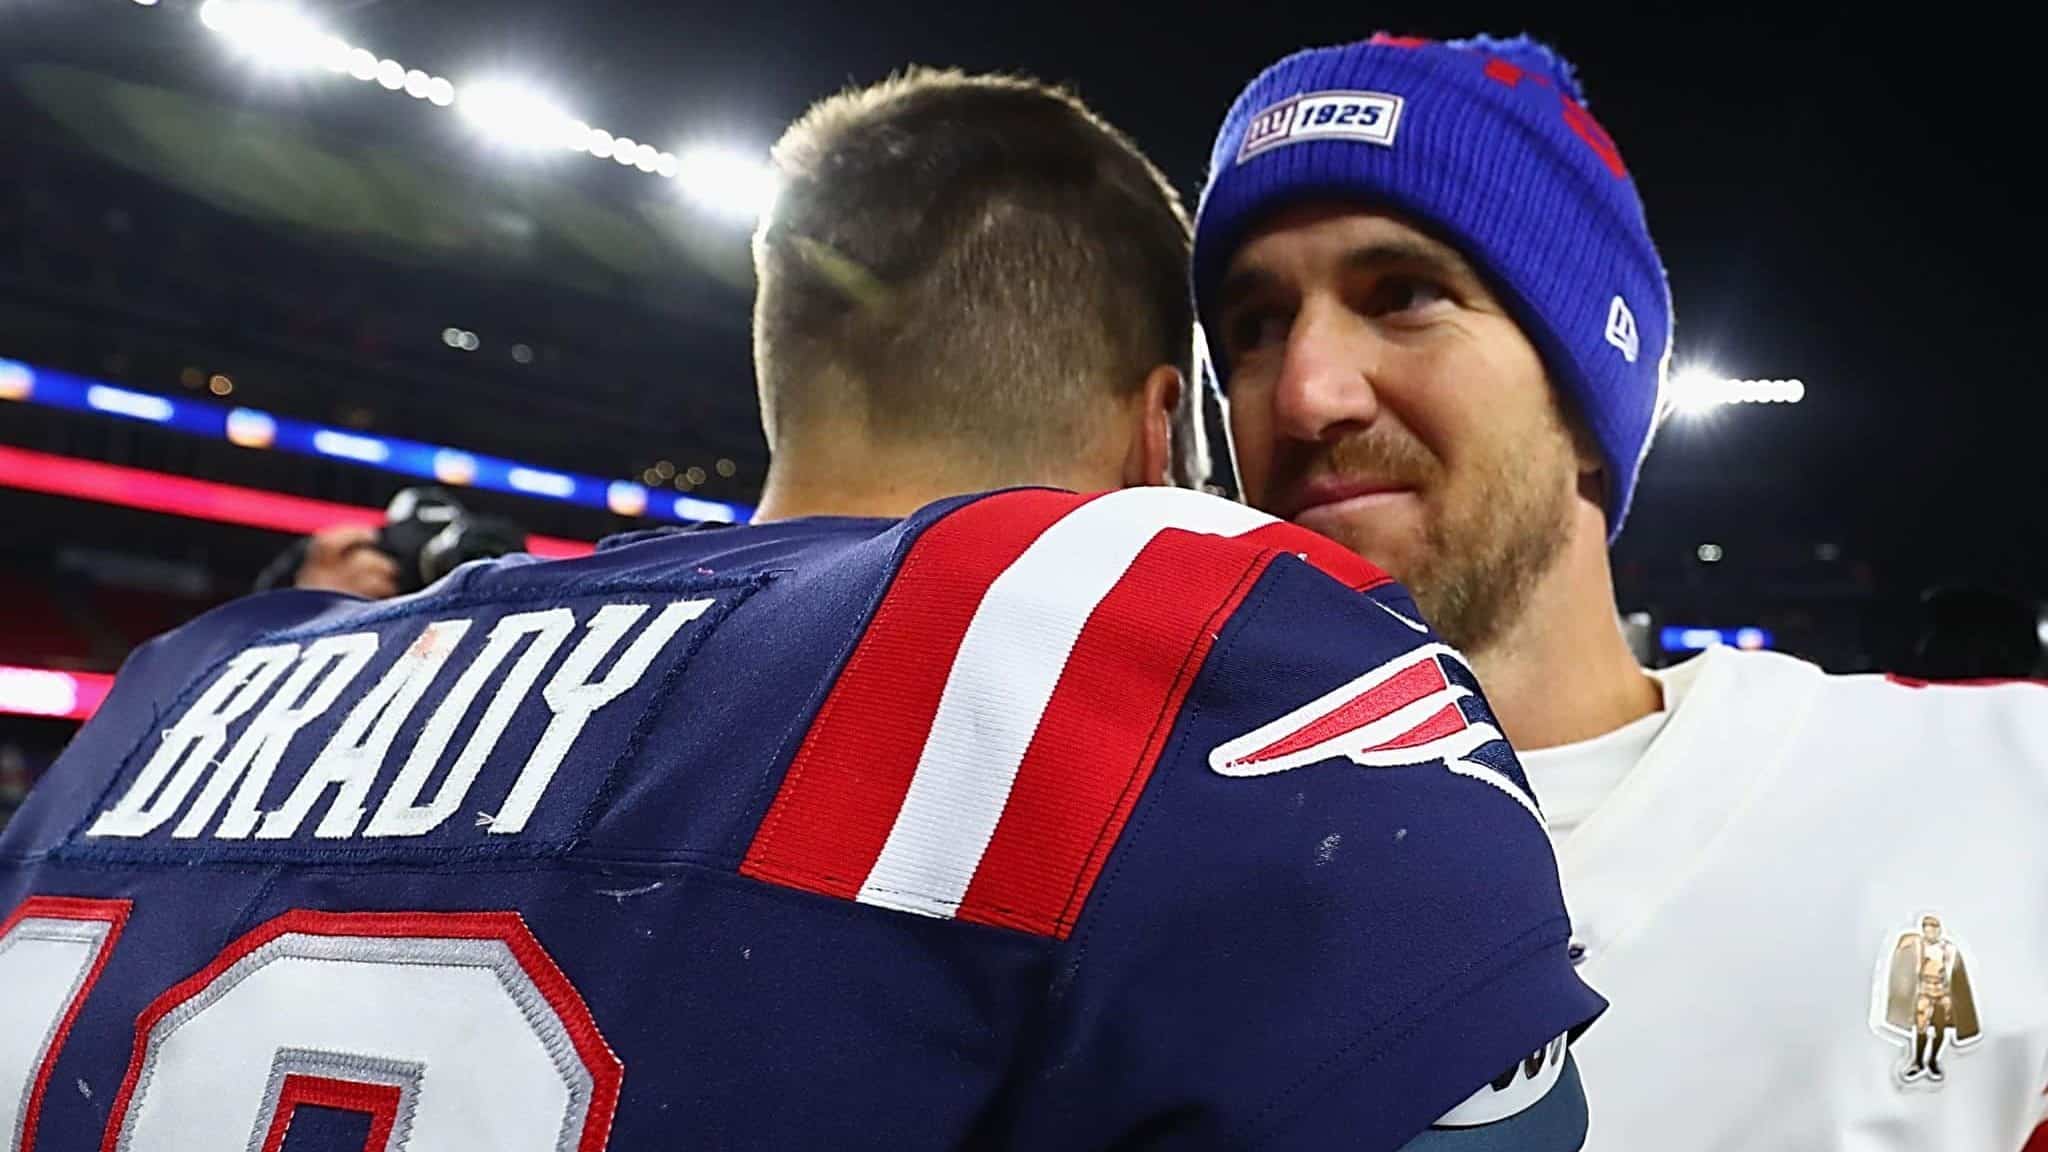 FOXBOROUGH, MASSACHUSETTS - OCTOBER 10: Tom Brady #12 of the New England Patriots shakes hands with Eli Manning #10 of the New York Giants after their game at Gillette Stadium on October 10, 2019 in Foxborough, Massachusetts. The New England Patriots defeated the New York Giants with a score of 35 to 14.